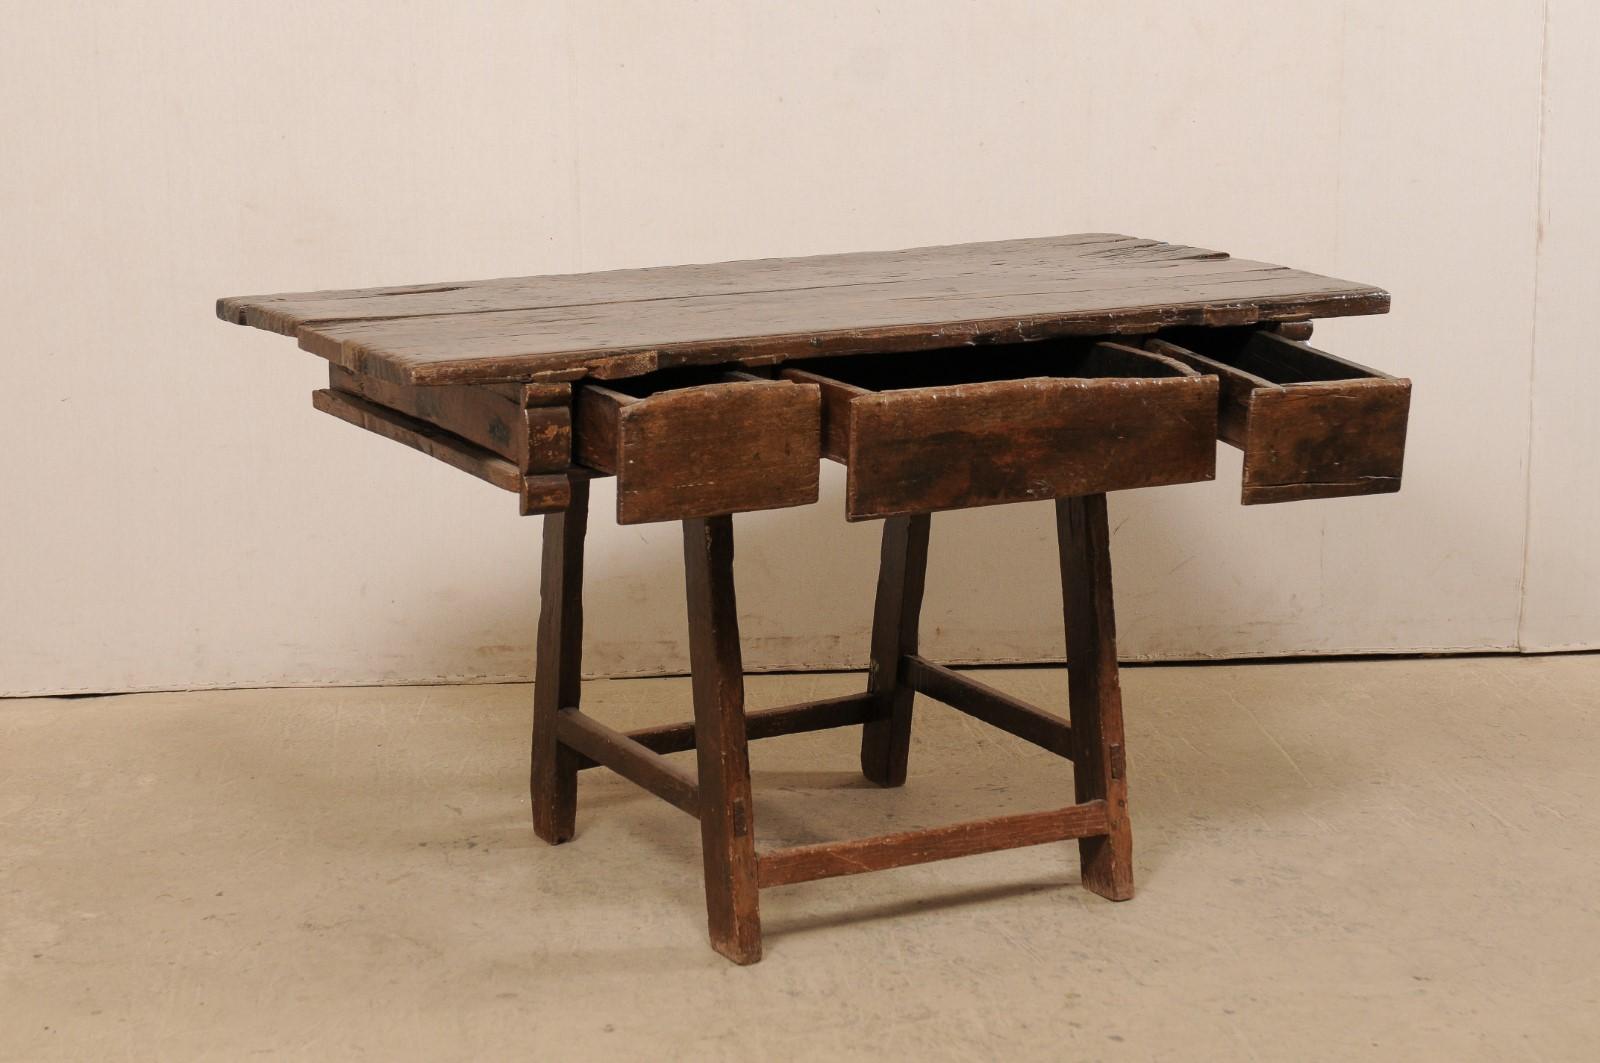 18th C. Brazilian Peroba Wood Table with Drawers, Exquisitely Rustic In Good Condition For Sale In Atlanta, GA